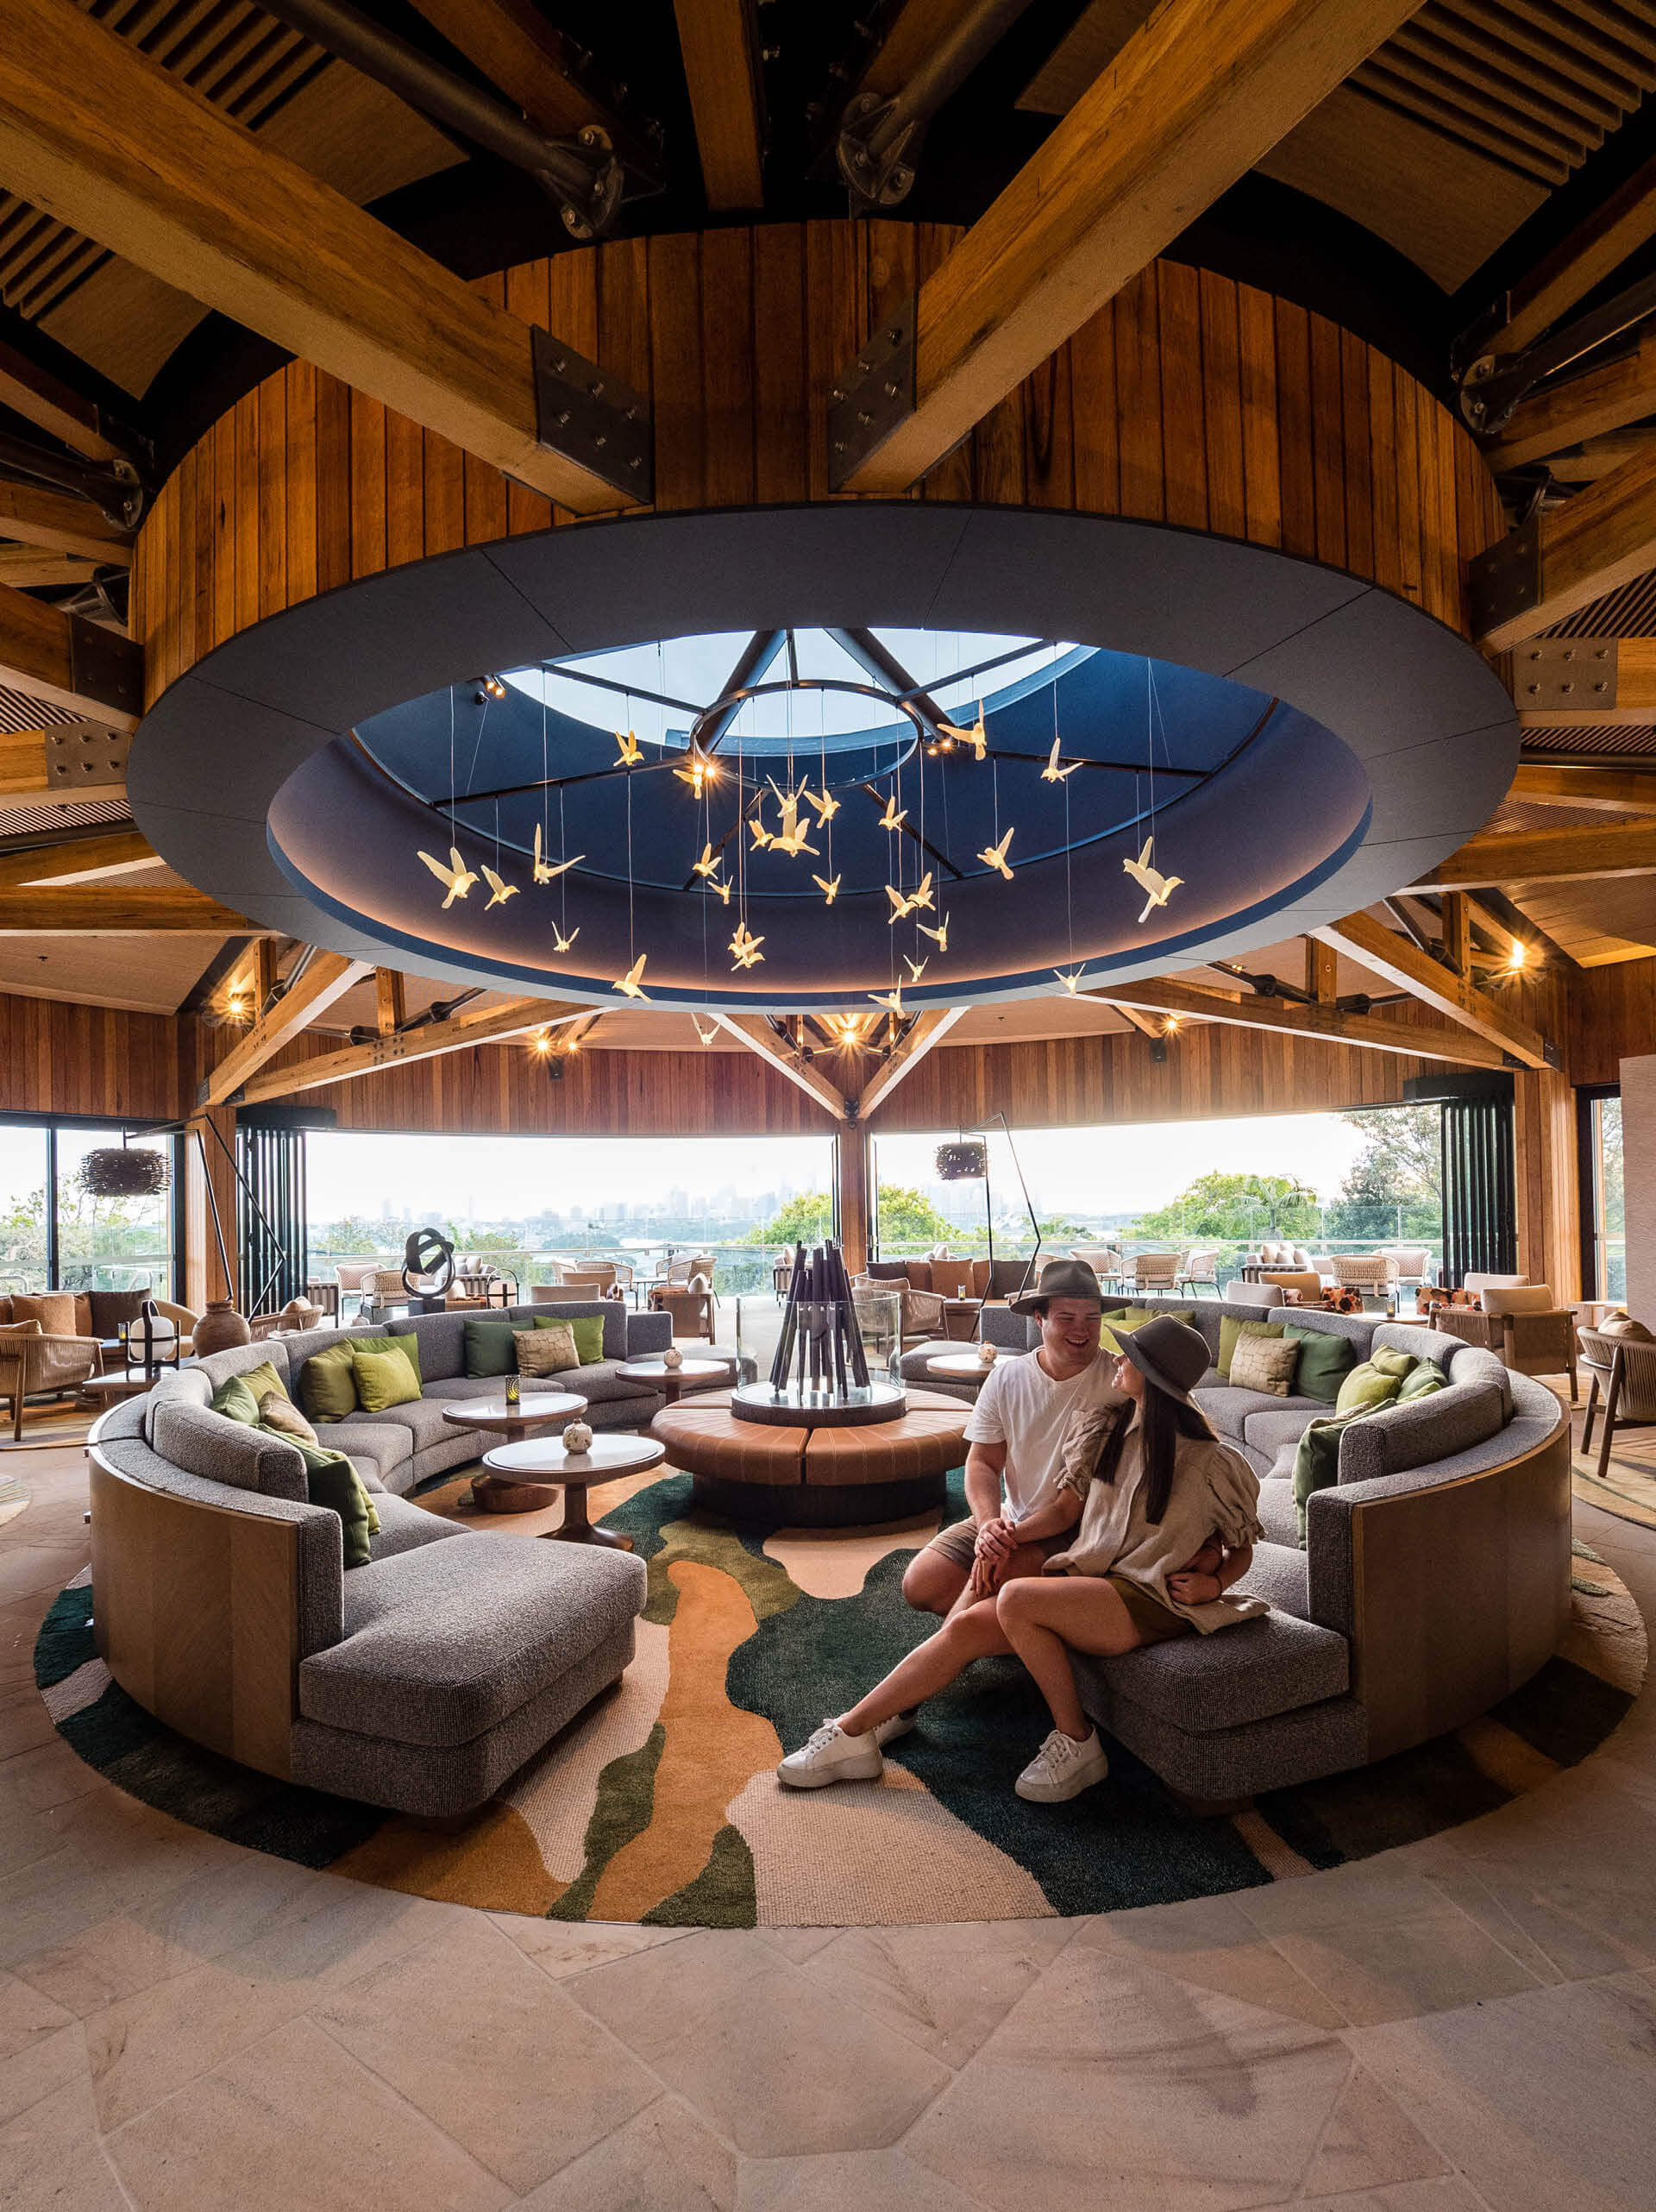 4 couple sitting in central seating feature within reception lounge at taronga wildlife retreat sydney taylor construction hospitality